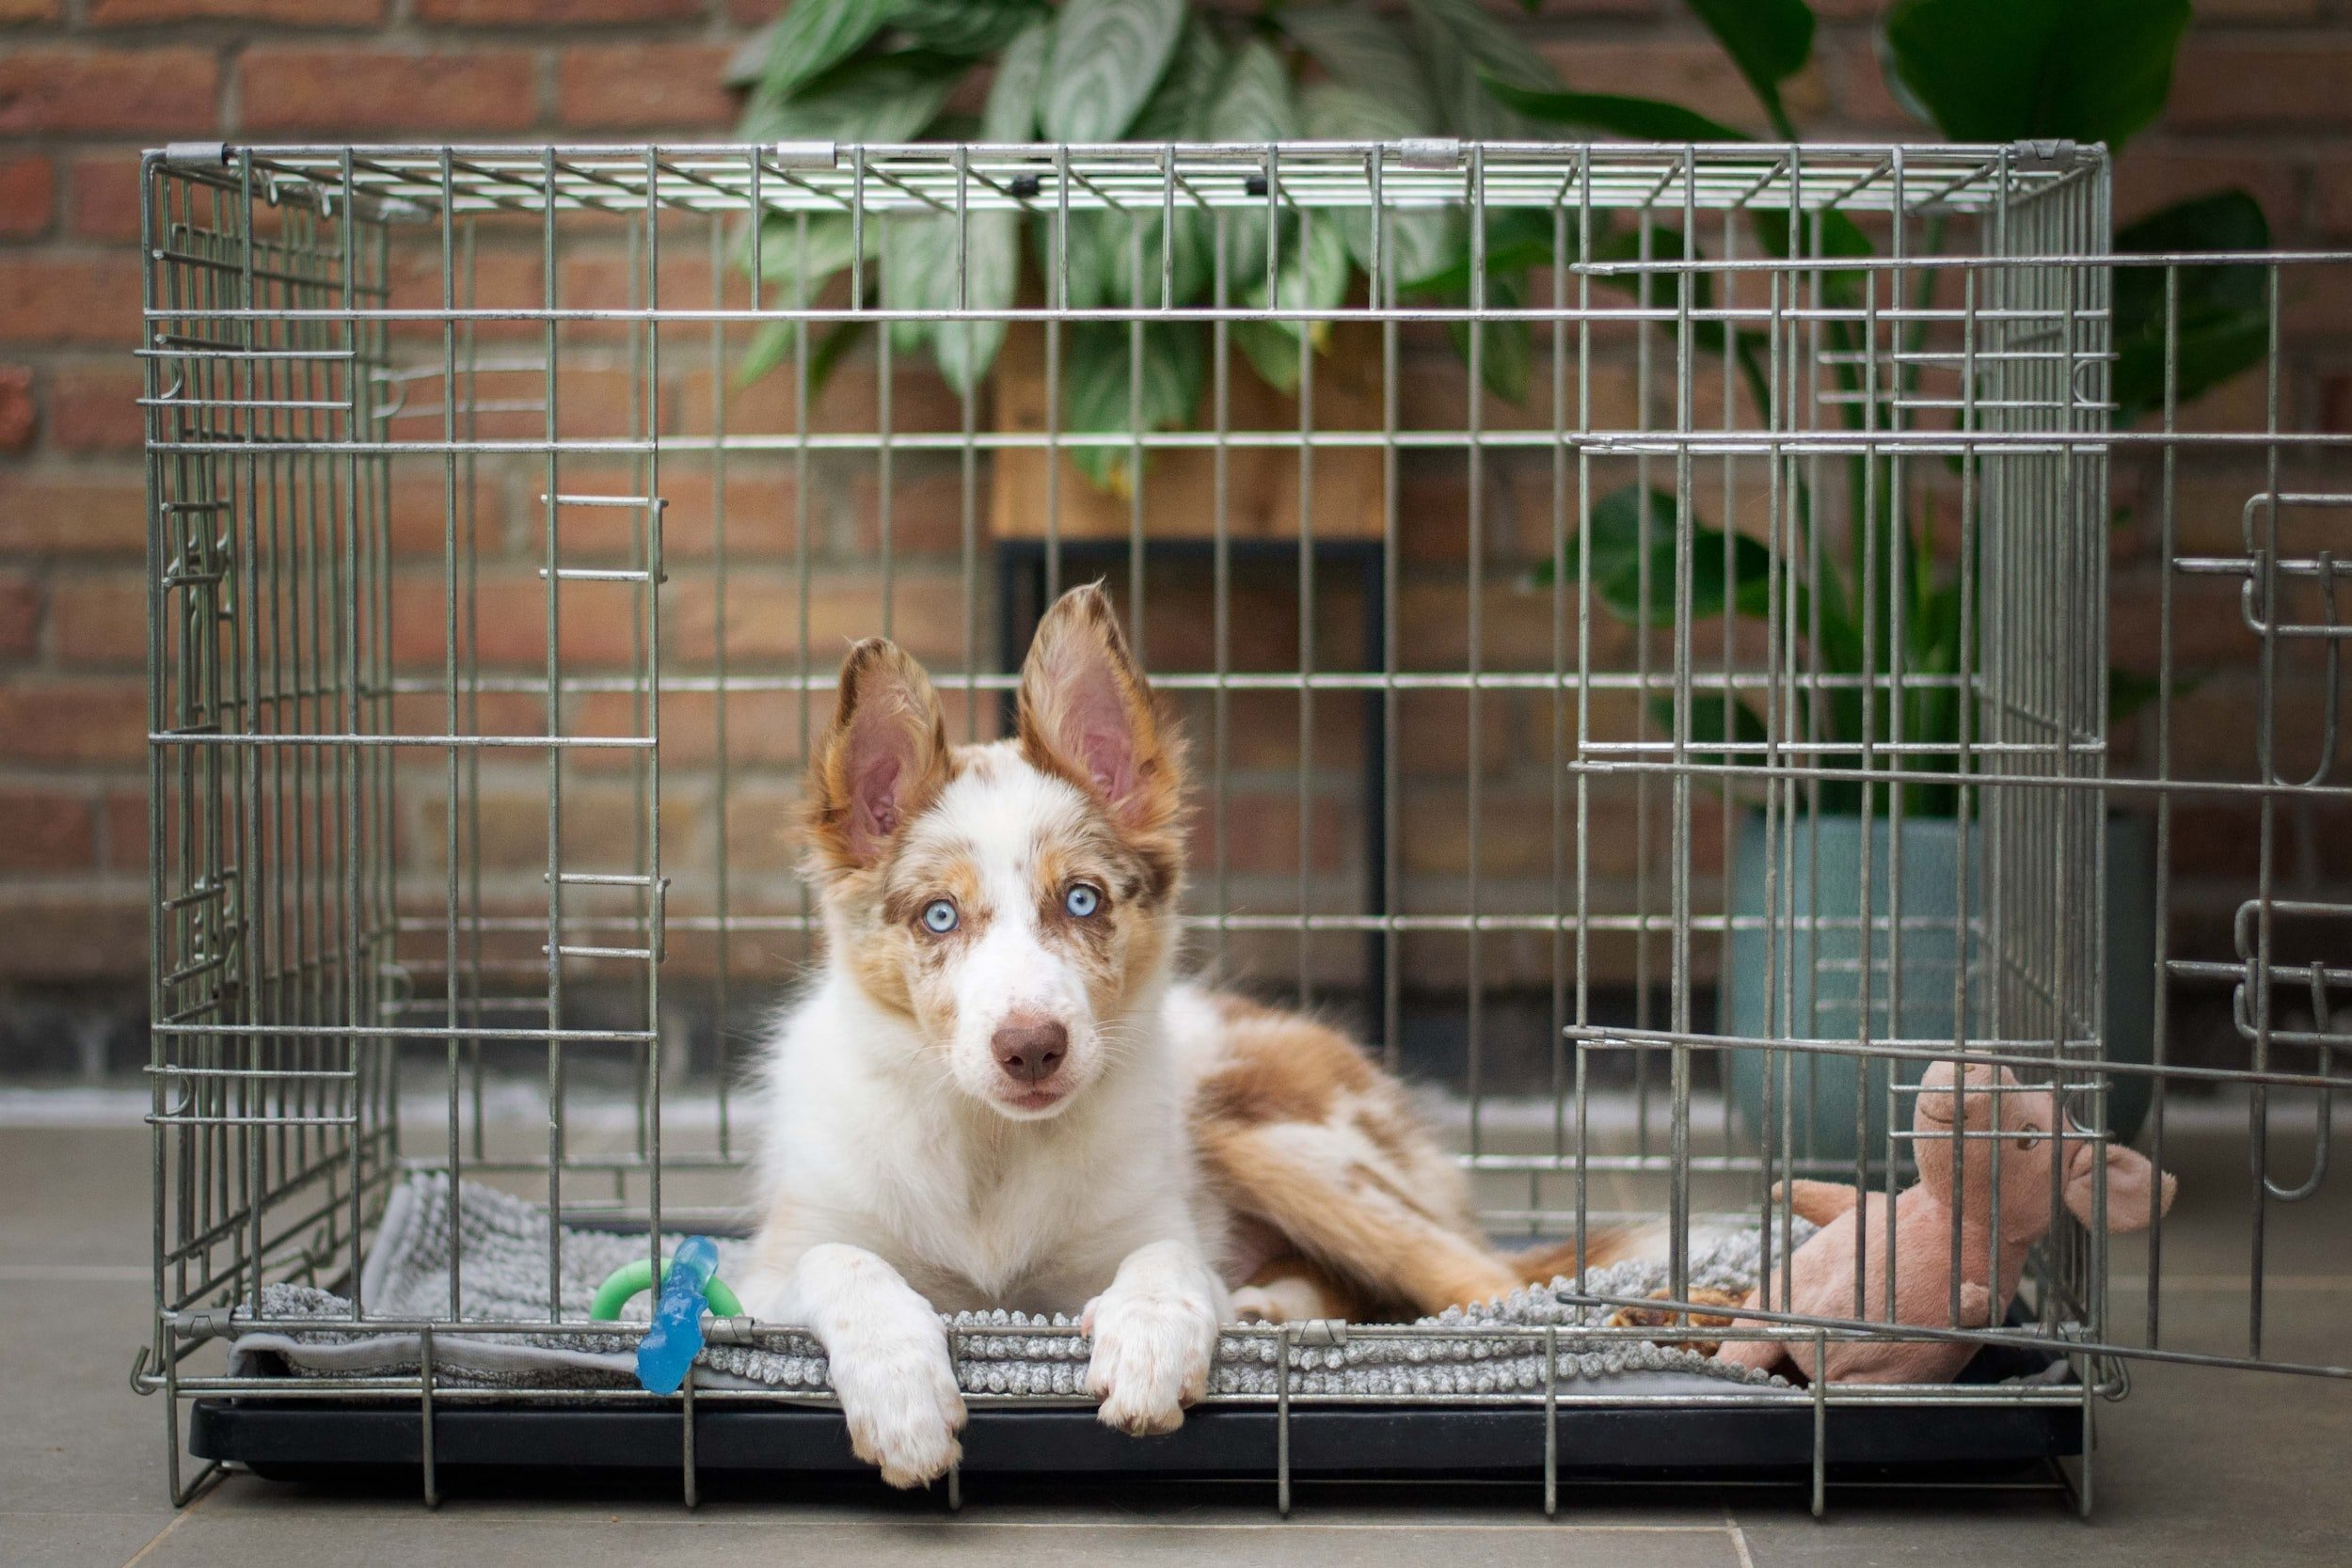 Choosing What to Put in a Dog’s Crate 